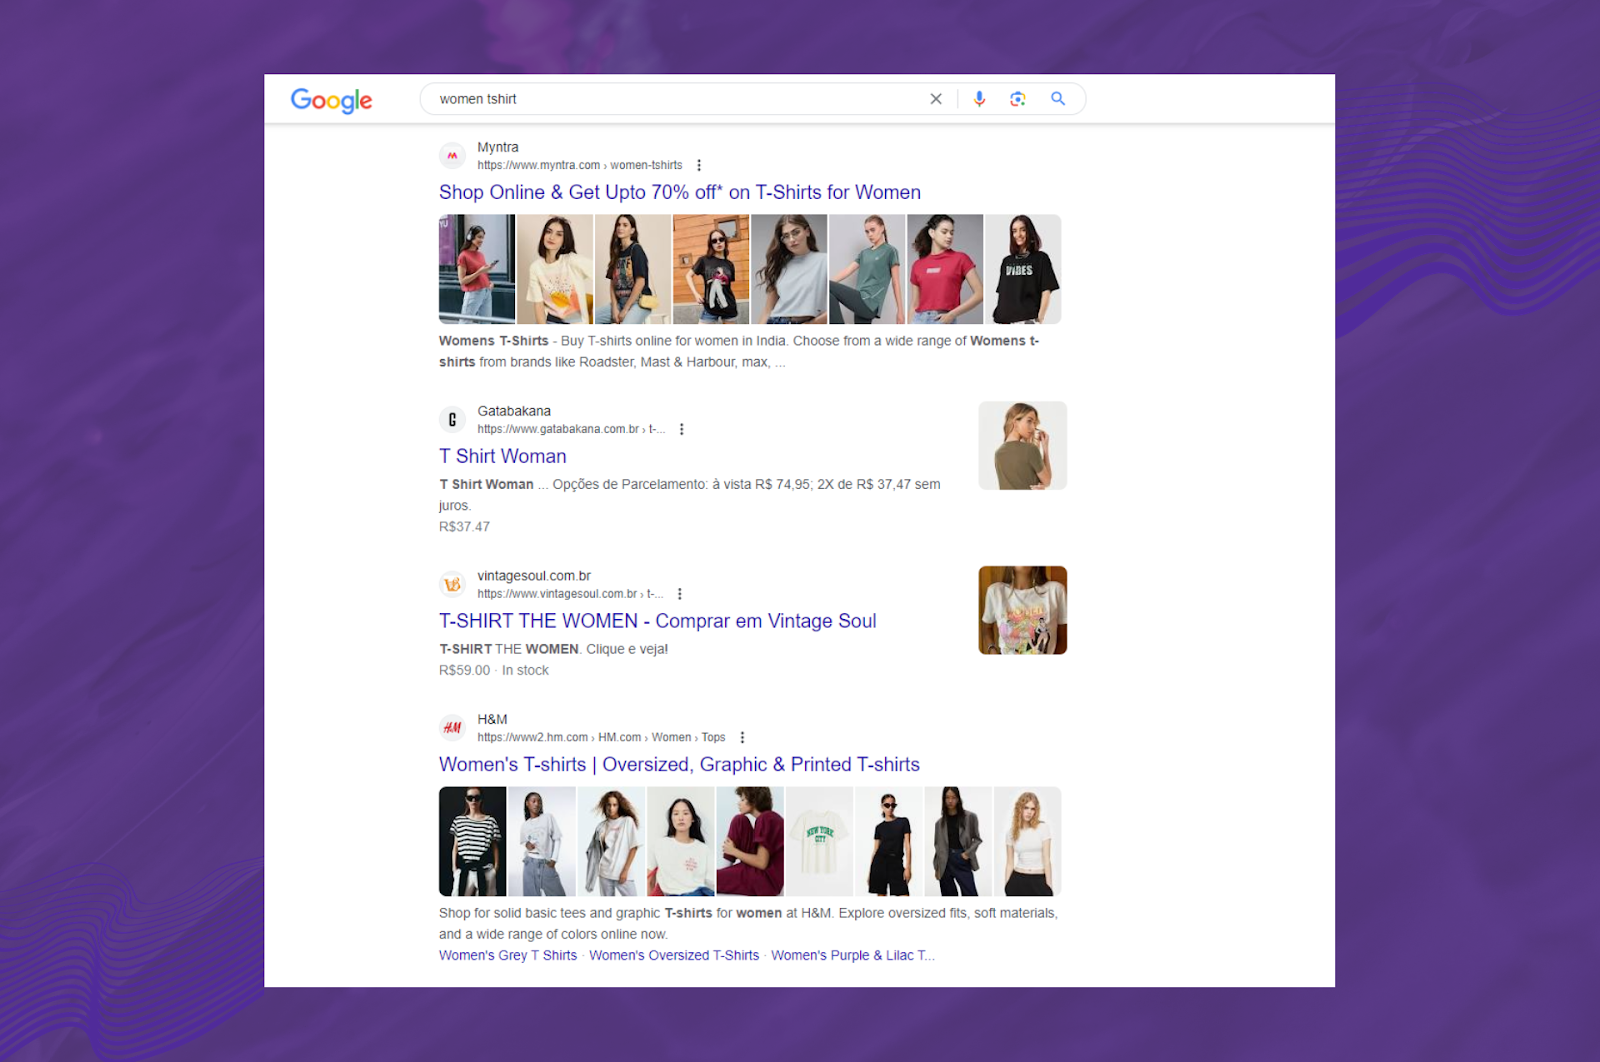 Google search results for women's t-shirts, demonstrating effective SEO practices for apparel eCommerce